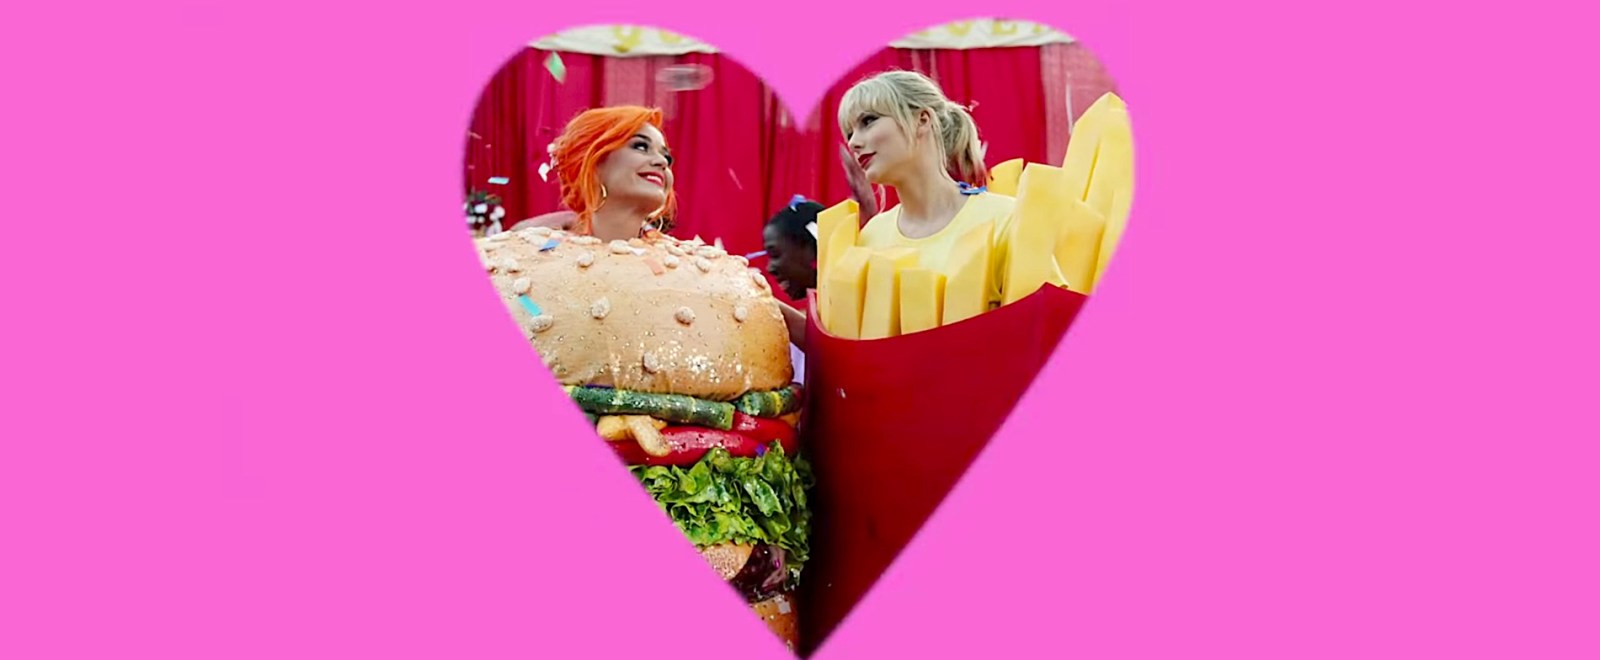 katy-perry-taylor-swift-you-need-to-calm-down-video-heart-full.jpg